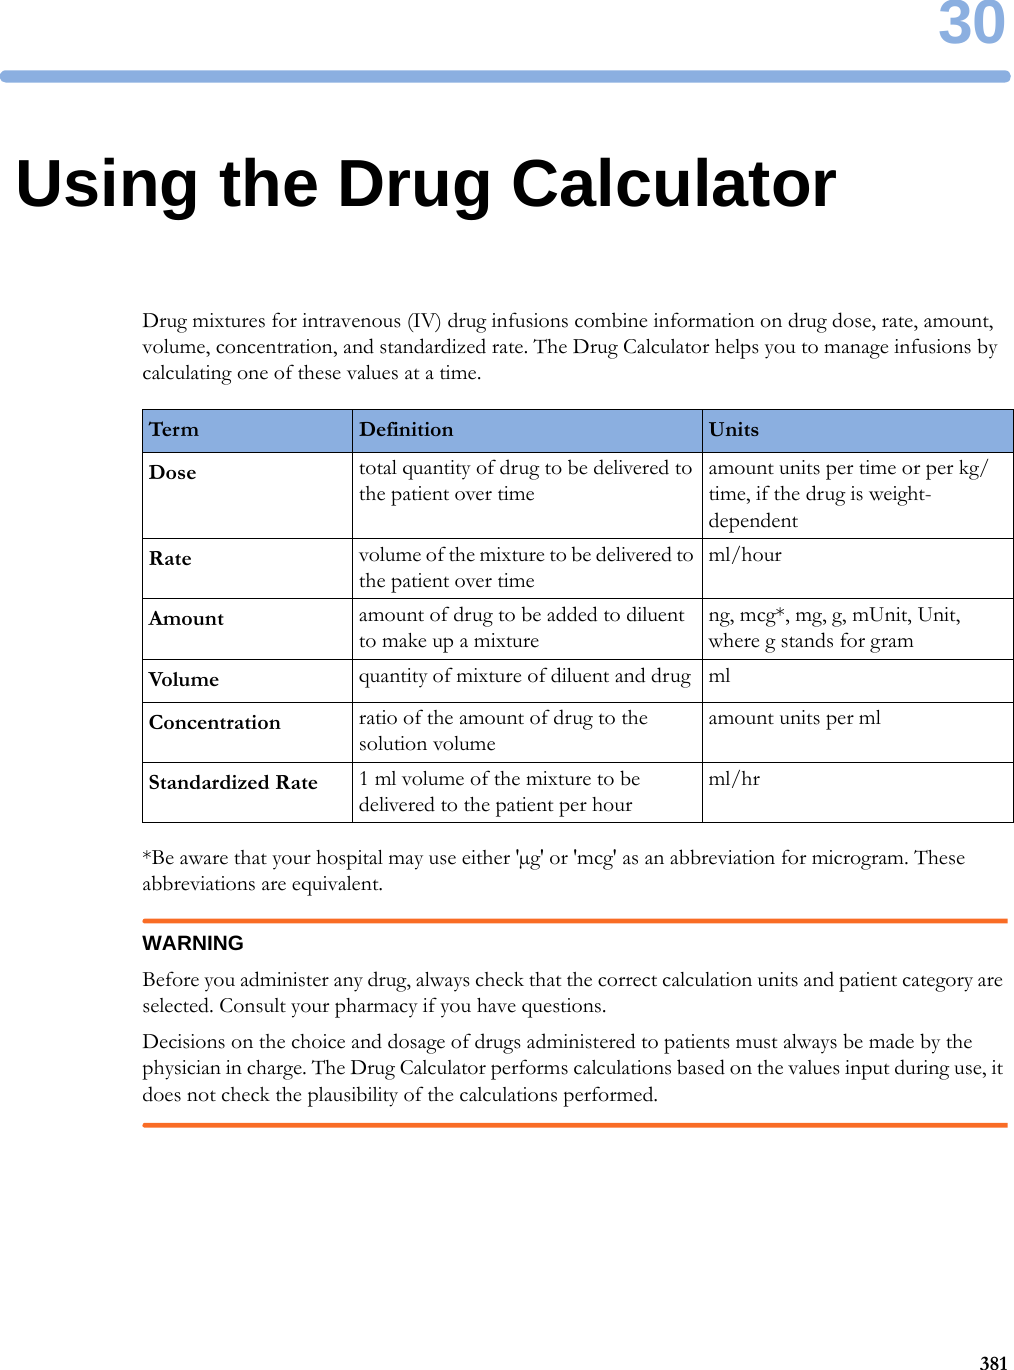 3038130Using the Drug CalculatorDrug mixtures for intravenous (IV) drug infusions combine information on drug dose, rate, amount, volume, concentration, and standardized rate. The Drug Calculator helps you to manage infusions by calculating one of these values at a time.*Be aware that your hospital may use either &apos;µg&apos; or &apos;mcg&apos; as an abbreviation for microgram. These abbreviations are equivalent.WARNINGBefore you administer any drug, always check that the correct calculation units and patient category are selected. Consult your pharmacy if you have questions.Decisions on the choice and dosage of drugs administered to patients must always be made by the physician in charge. The Drug Calculator performs calculations based on the values input during use, it does not check the plausibility of the calculations performed.Ter m Definition UnitsDose total quantity of drug to be delivered to the patient over timeamount units per time or per kg/time, if the drug is weight-dependentRate volume of the mixture to be delivered to the patient over timeml/hourAmount amount of drug to be added to diluent to make up a mixtureng, mcg*, mg, g, mUnit, Unit, where g stands for gramVolume quantity of mixture of diluent and drug mlConcentration ratio of the amount of drug to the solution volumeamount units per mlStandardized Rate 1 ml volume of the mixture to be delivered to the patient per hourml/hr